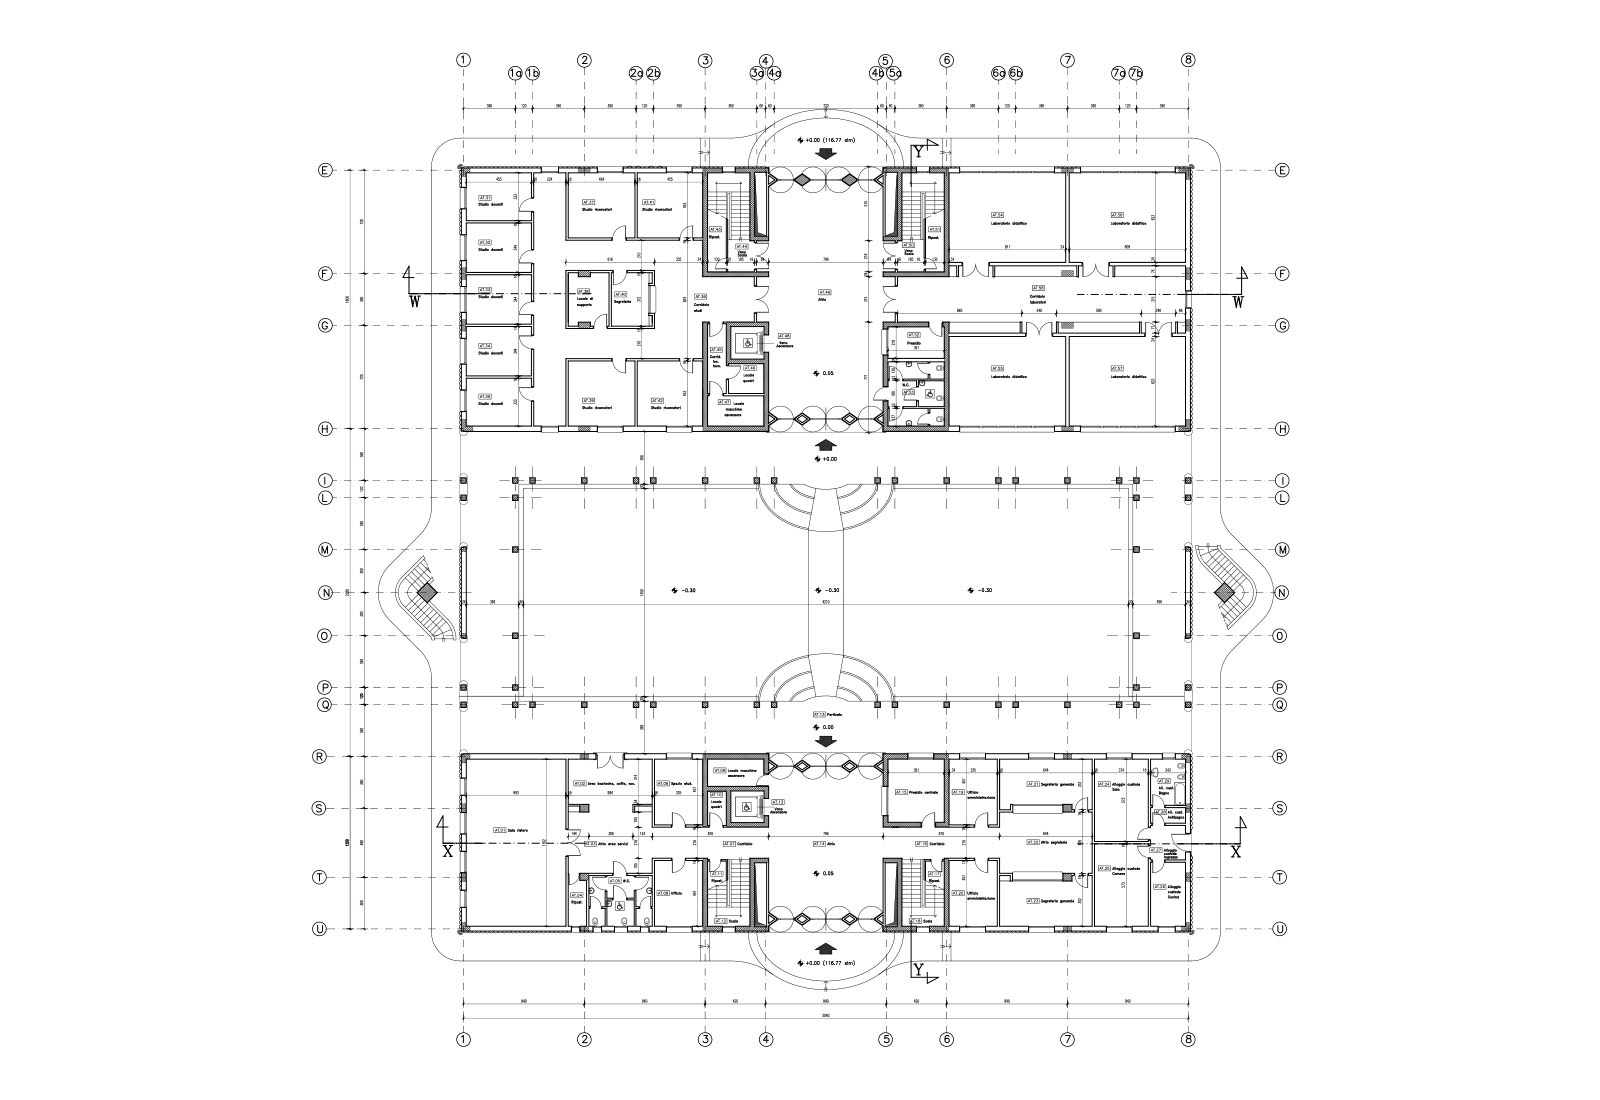 Faculty of Veterinary in Matelica - Ground floor plan building A